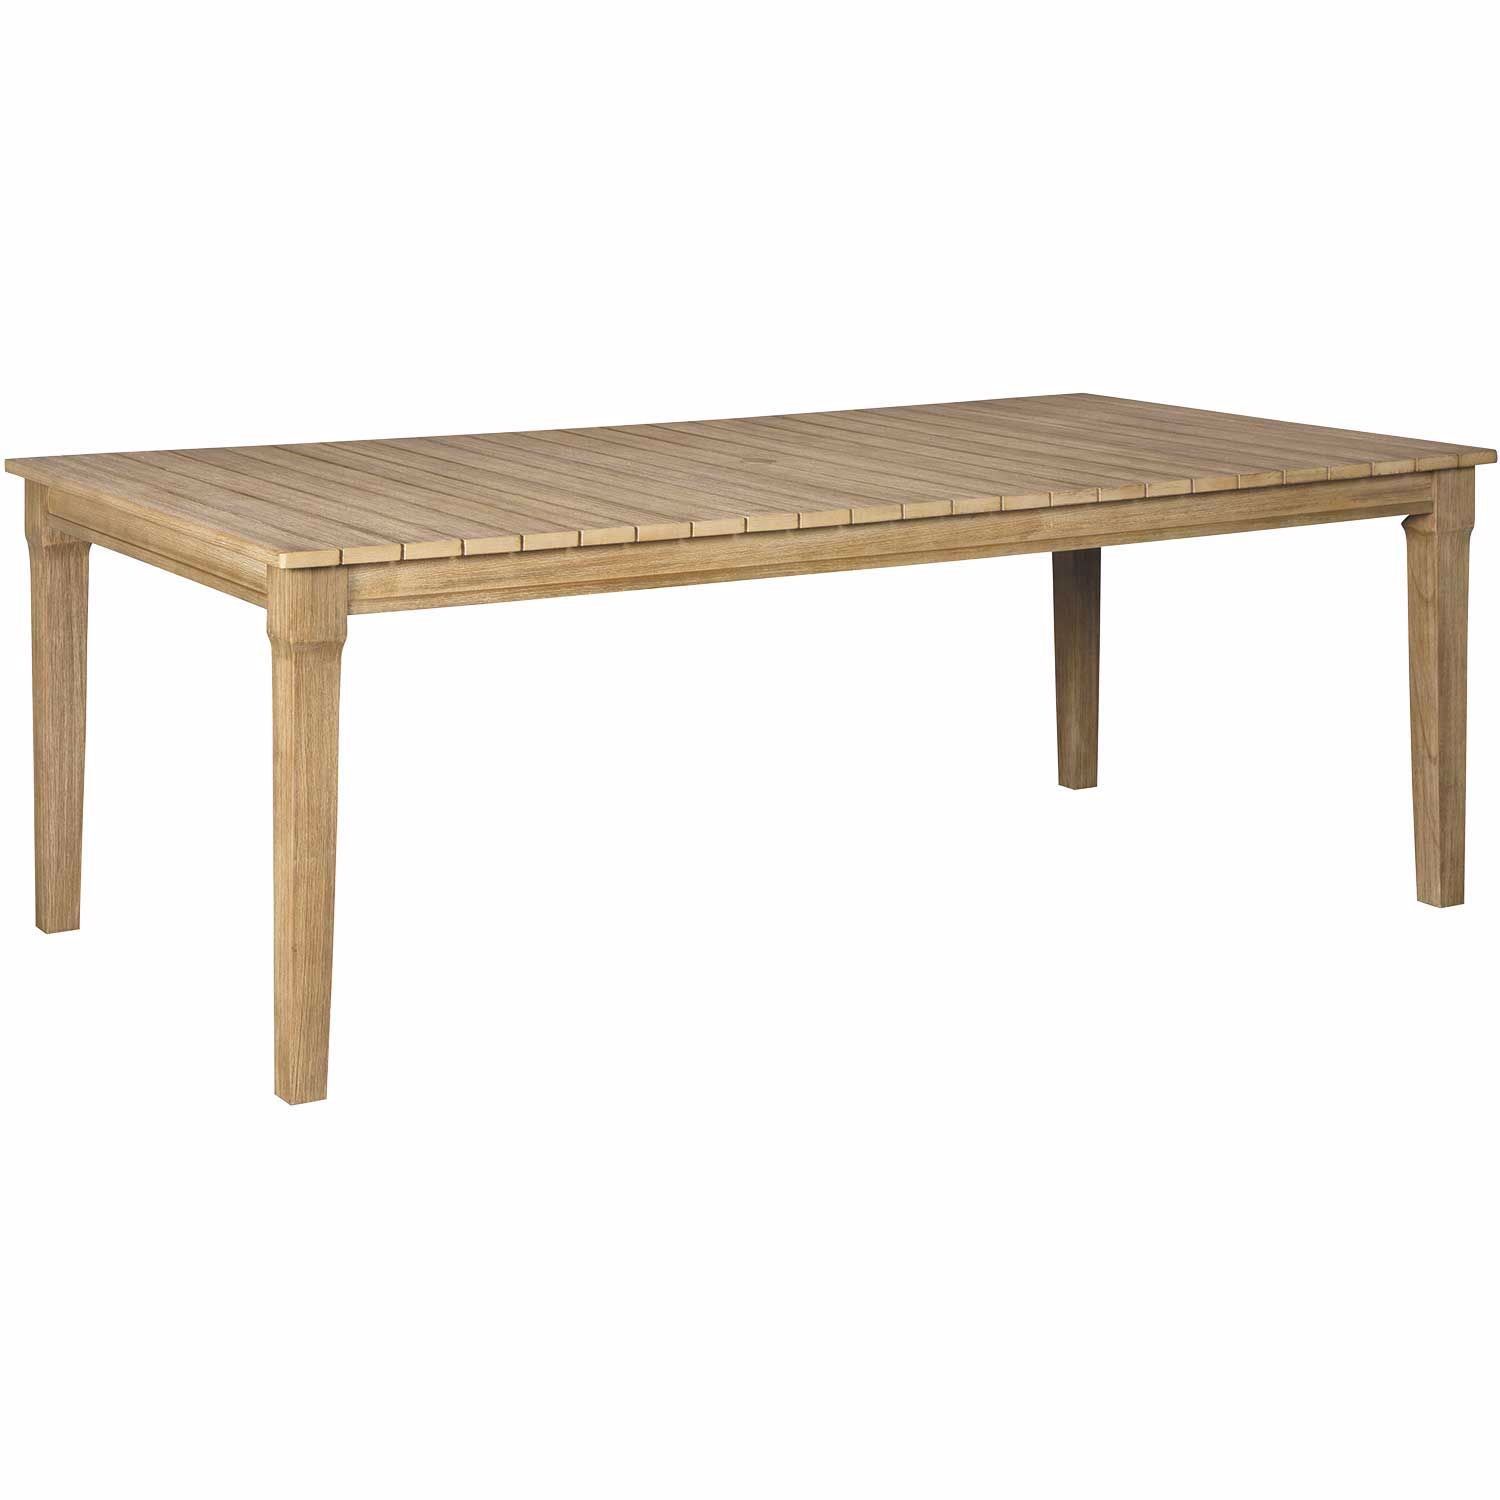 Clare View Rectangular Outdoor Table P801 625 Ashley Furniture